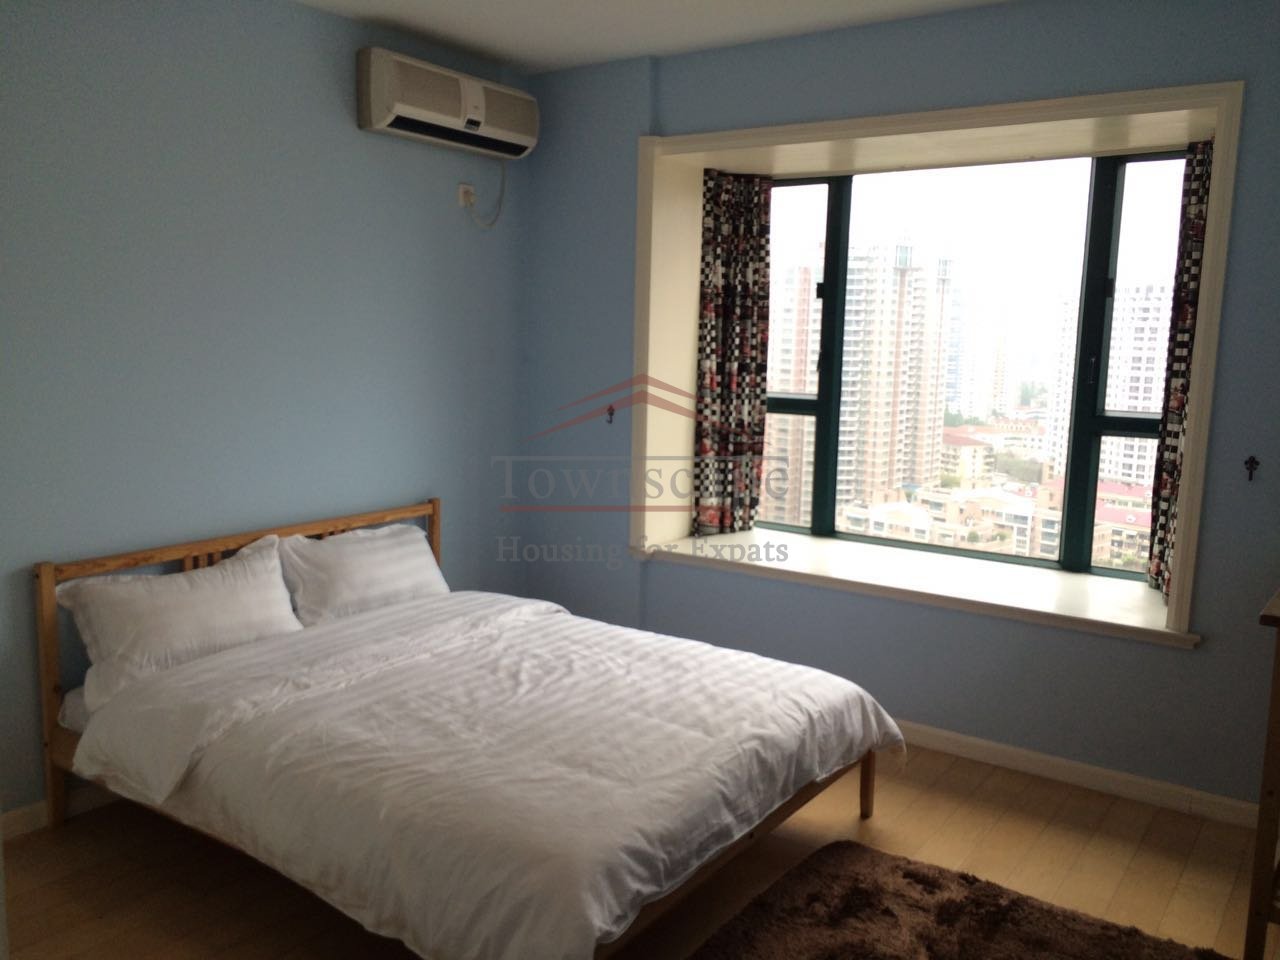  Excellent 2 bedroom Apt. in Shanghai French Concession